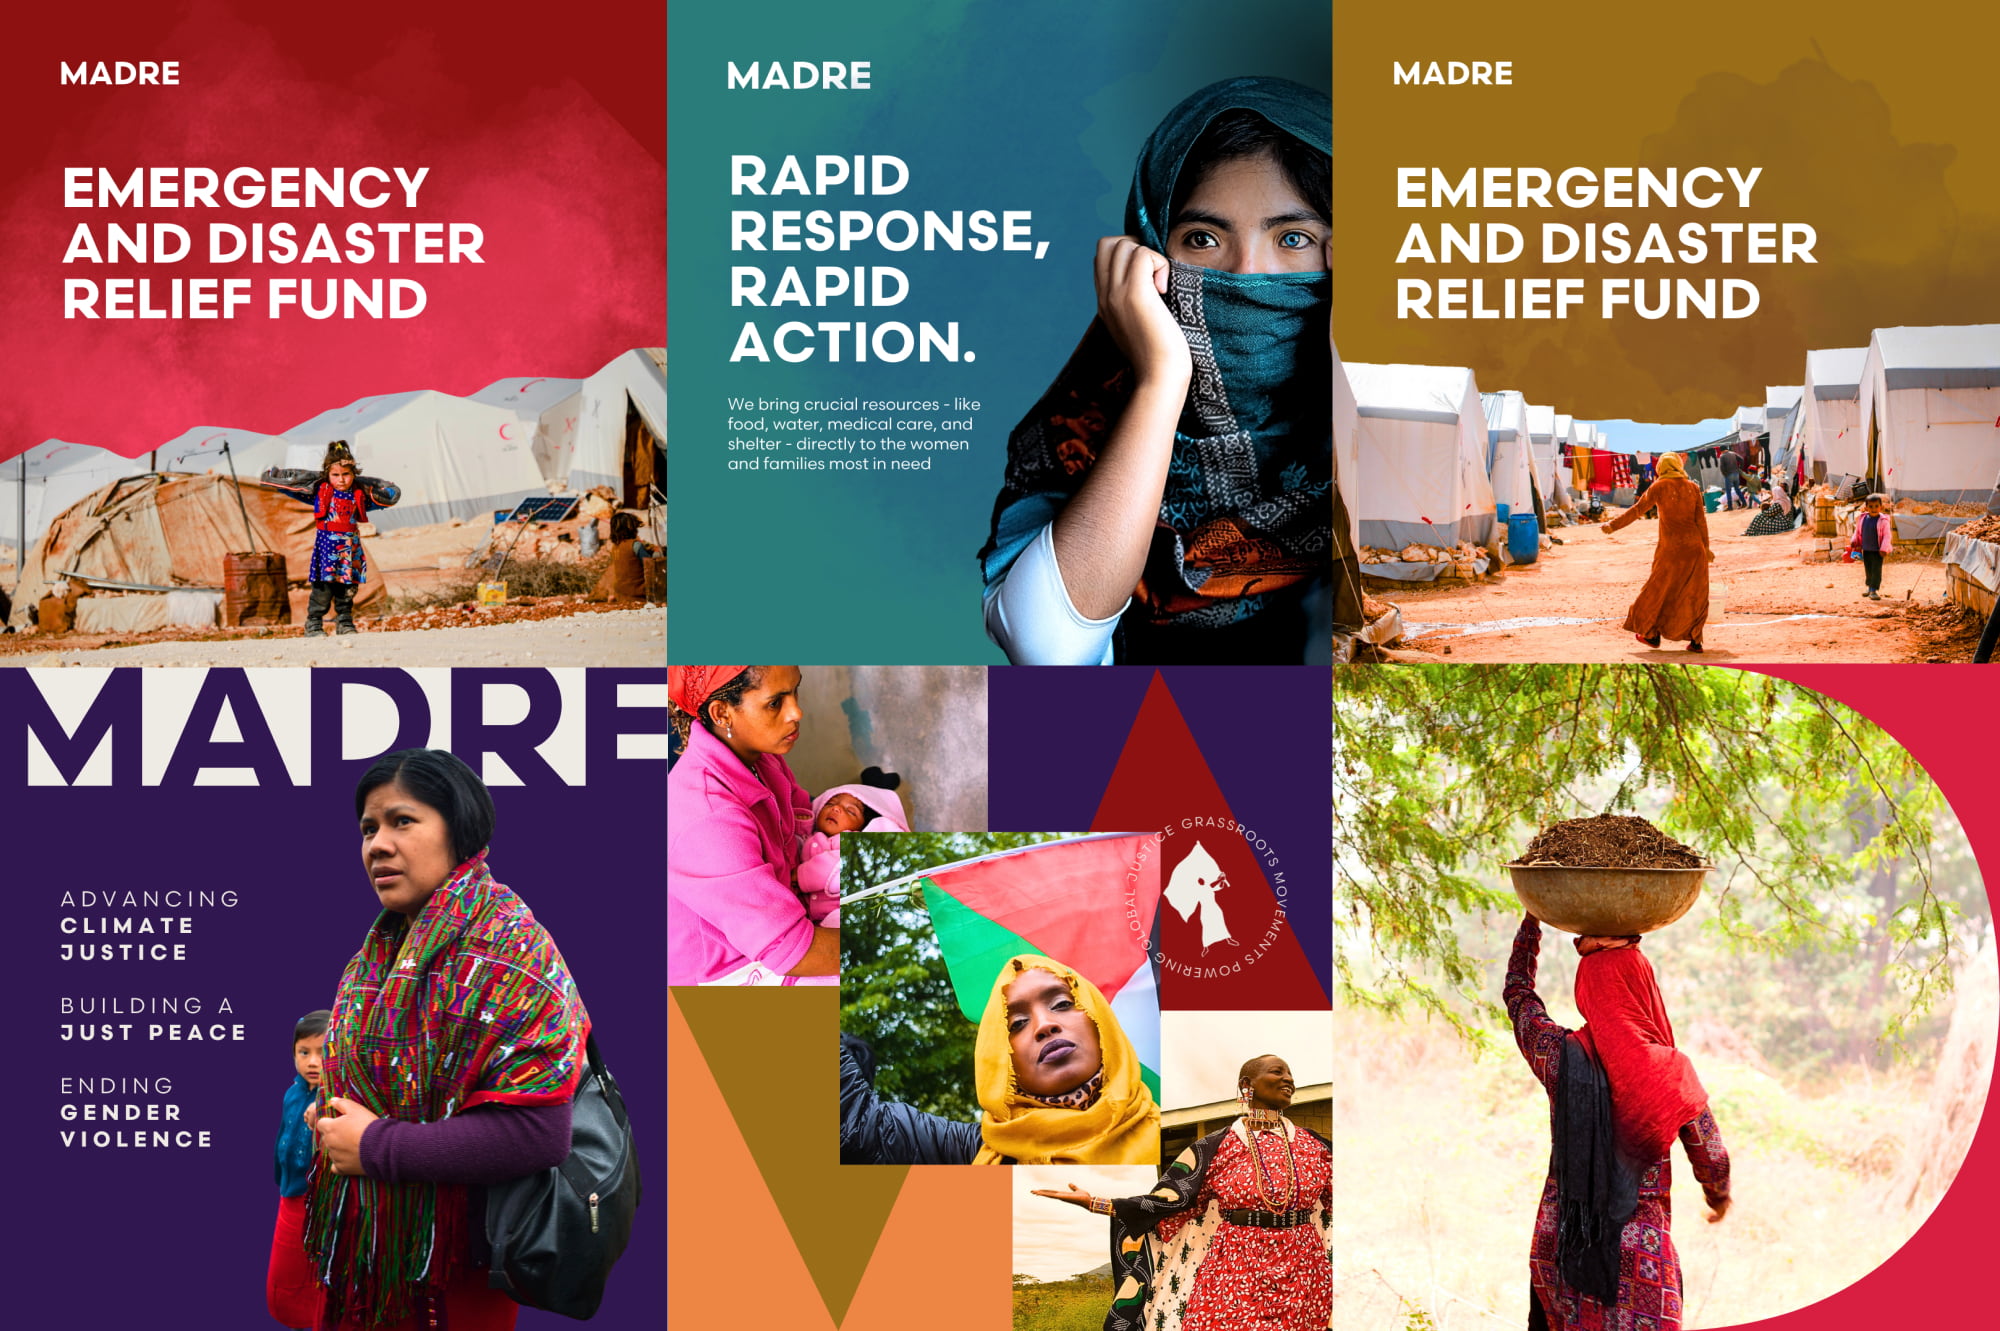 A collage of MADRE Instagram posts features six square designs. Three posts revolve around disaster relief: one is red, with a hot pink ink texture, and a headline reading “EMERGENCY AND DISASTER RELIEF FUND;” one is teal with a young woman in a silky blue hijab, her ice blue eyes only visible, alongside a headline which reads, “RAPID RESPONSE, RAPID ACTION;” and the third post is gold with a brown, inky texture and an image of a refugee woman dancing in the sun of a camp, while the headline reads “EMERGENCY AND DISASTER RELIEF FUND.” The second row of images features a mother wrapped in textiles with her child behind her looking off into the distance while facts about MADRE sit alongside her reading, “ADVANCING CLIMATE JUSTICE, BUILDING A JUST PEACE, ENDING GENDER VIOLENCE;” the second image in this row is a diverse collage of empowered woman sitting on bold and colorful shape graphics and an overlapping MADRE badge; and the final image is a woman carrying a basket on her head.